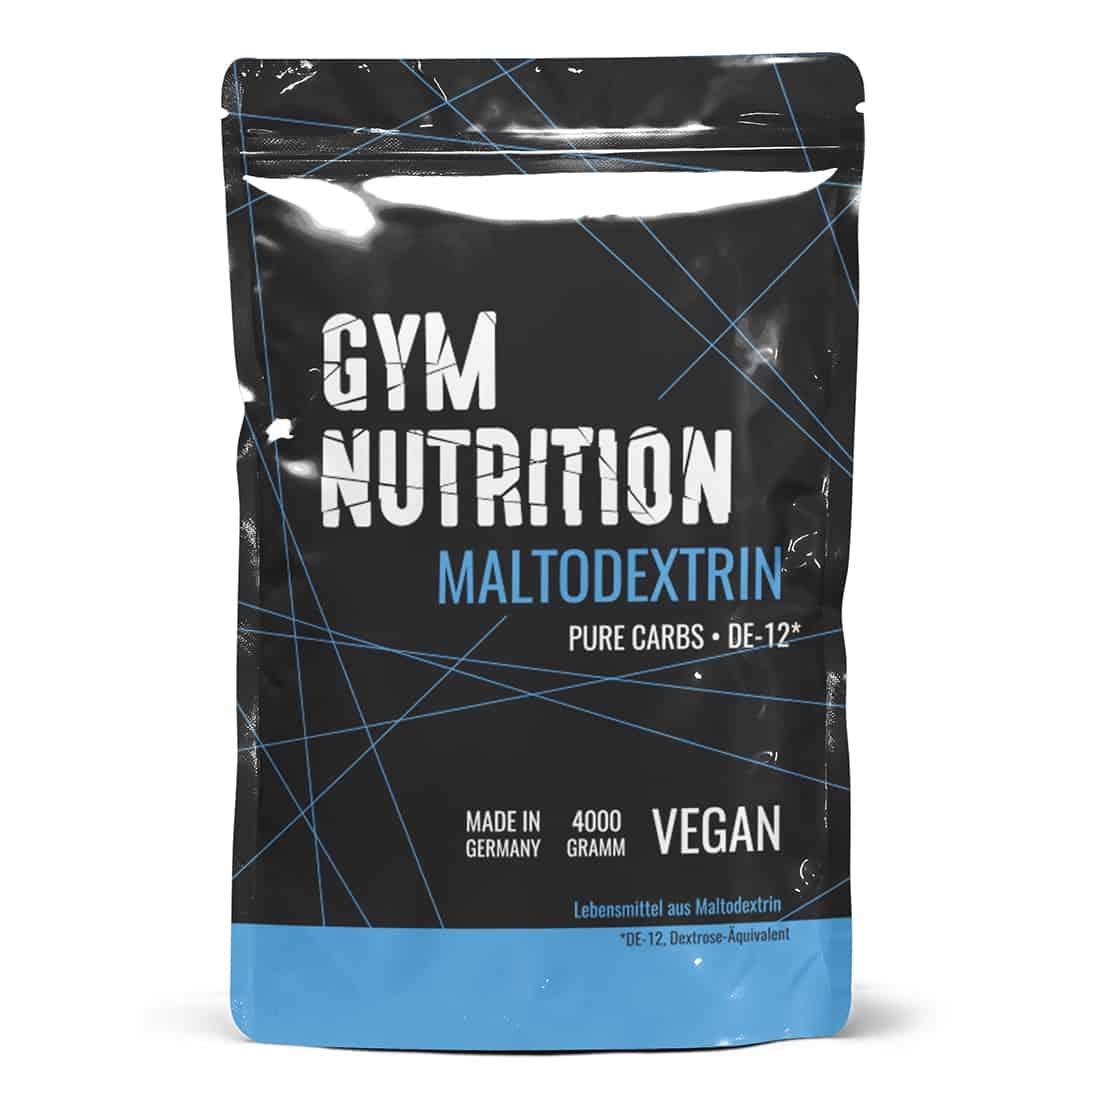 GYM-NUTRITION Hardcore Malto-dextrin | Fine carbohydrate powder | Popular with Fitness Powerlifing & Bodybuilding | Ideal for hardgainers | Bottled in Germany | Maltodextrin 12 | 1.5kg bag